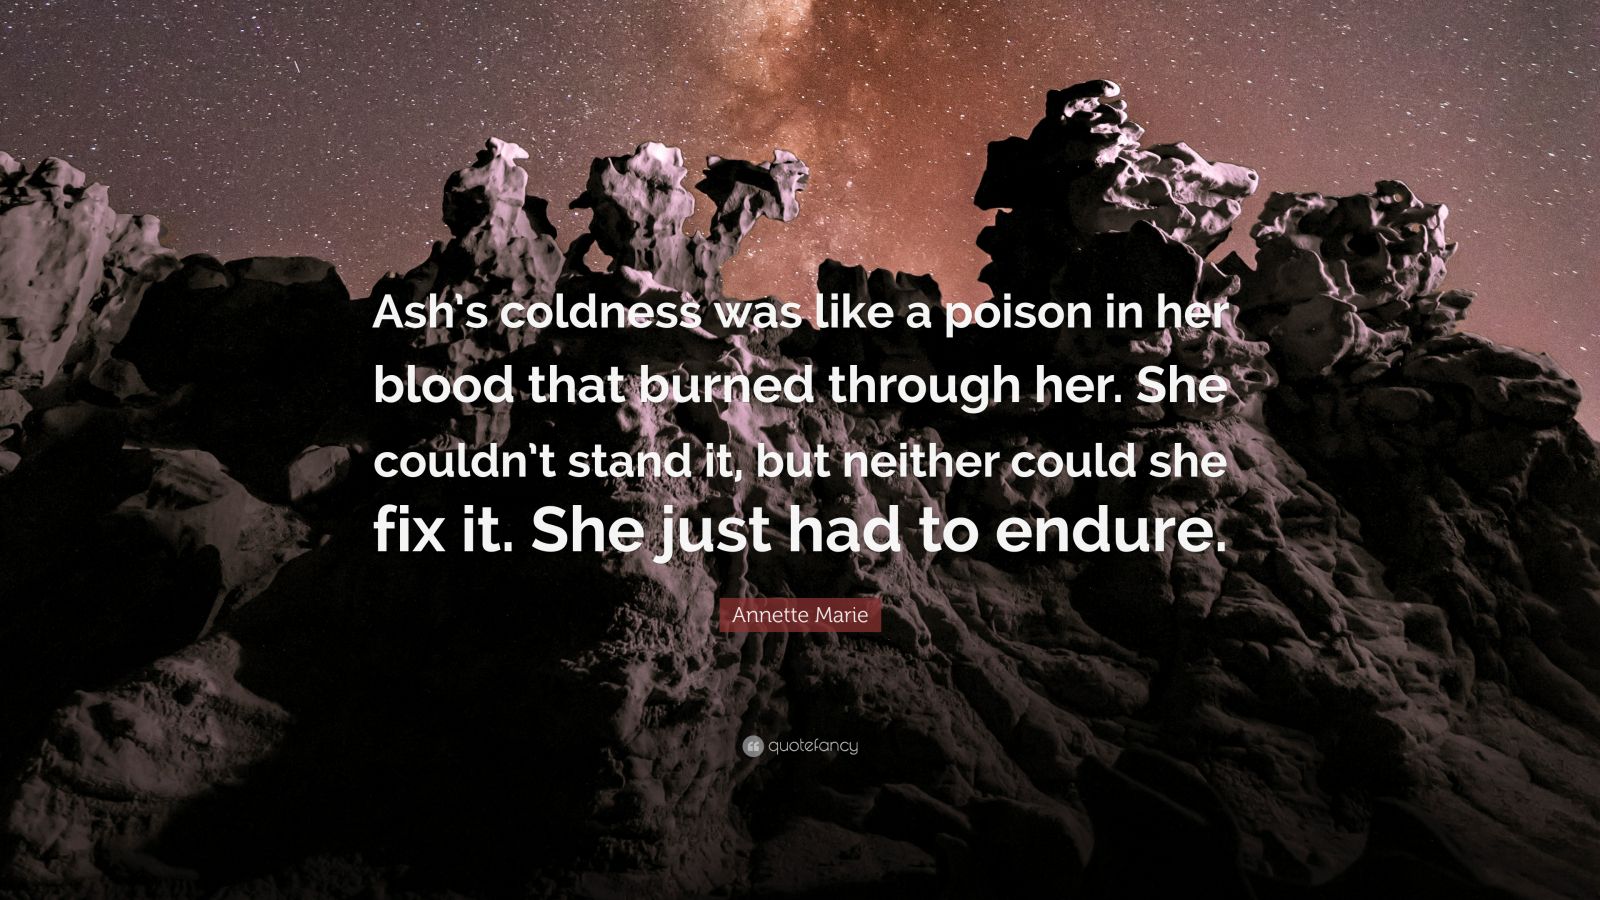 Annette Marie Quote: “Ash's coldness was like a poison in her blood that burned through her. She couldn't stand it, but neither could she fix .”